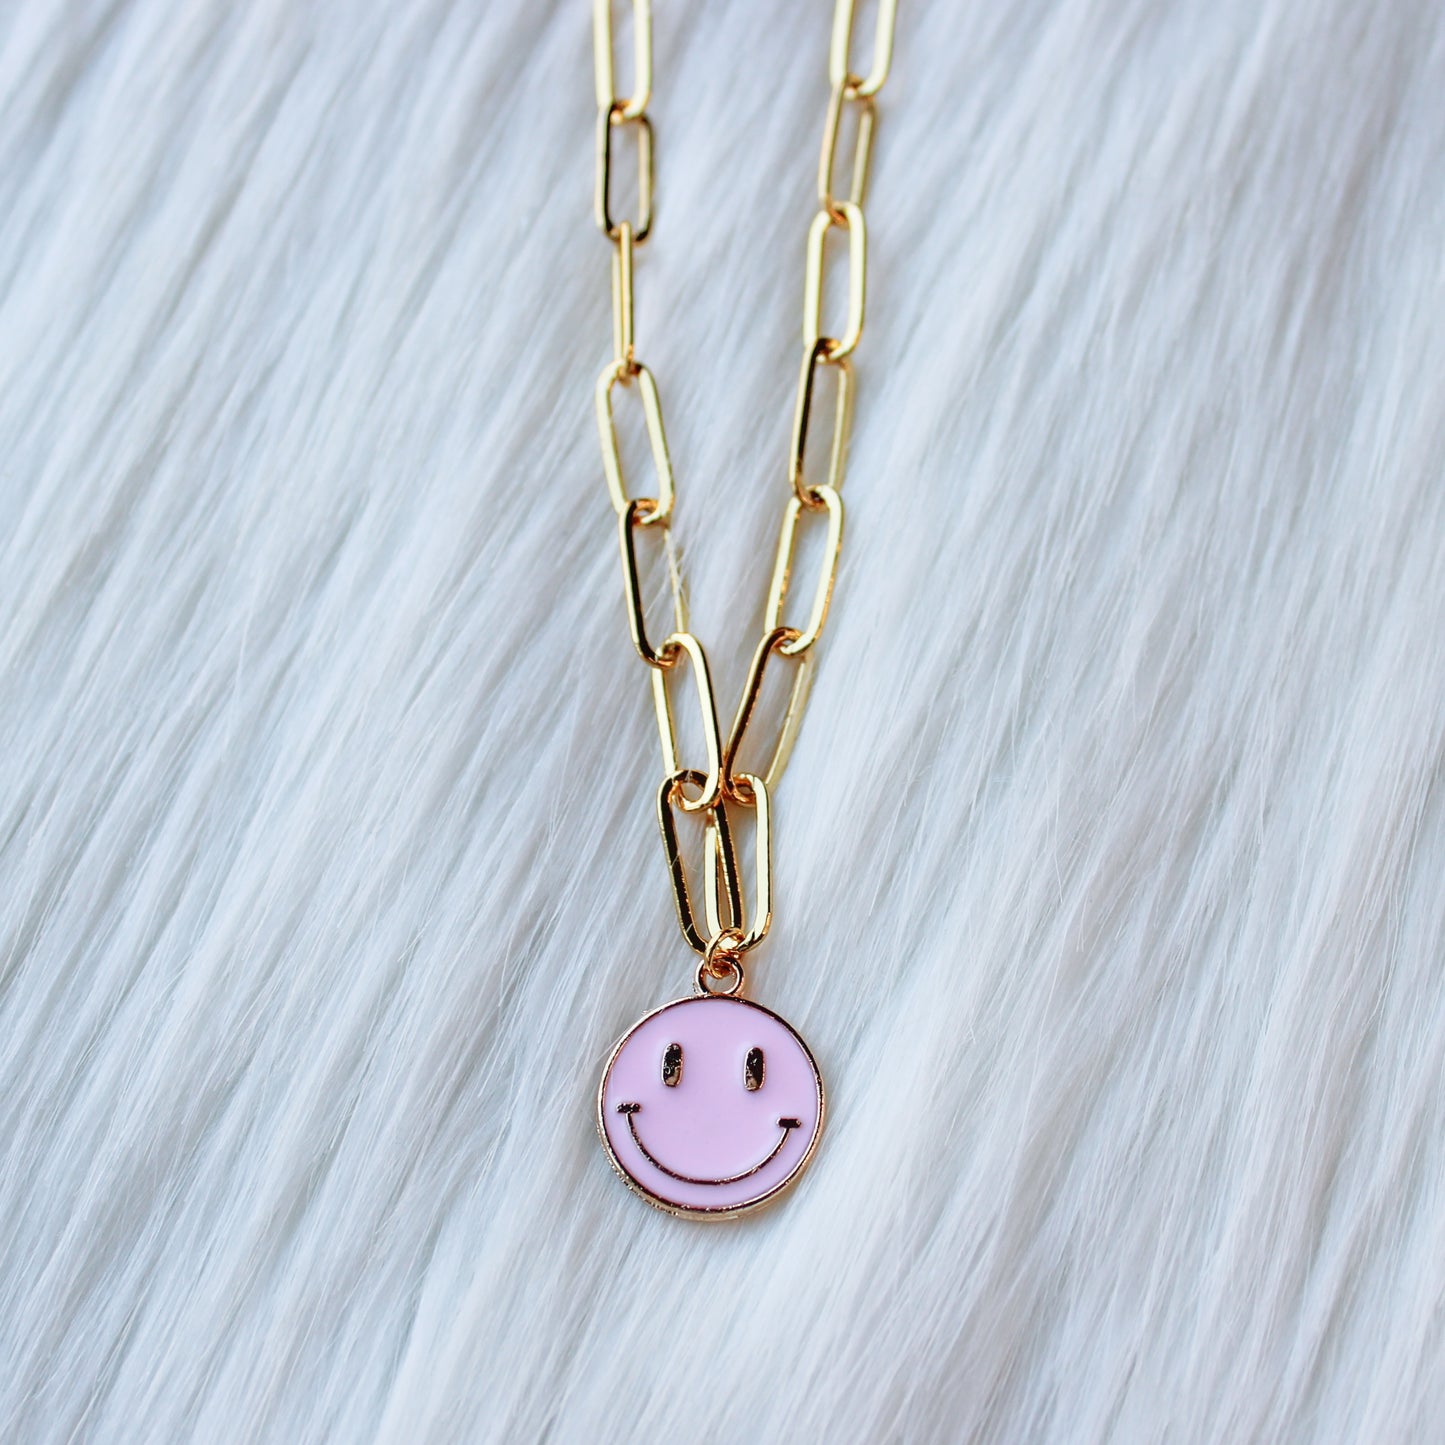 Large Light Pink Smiley Necklace